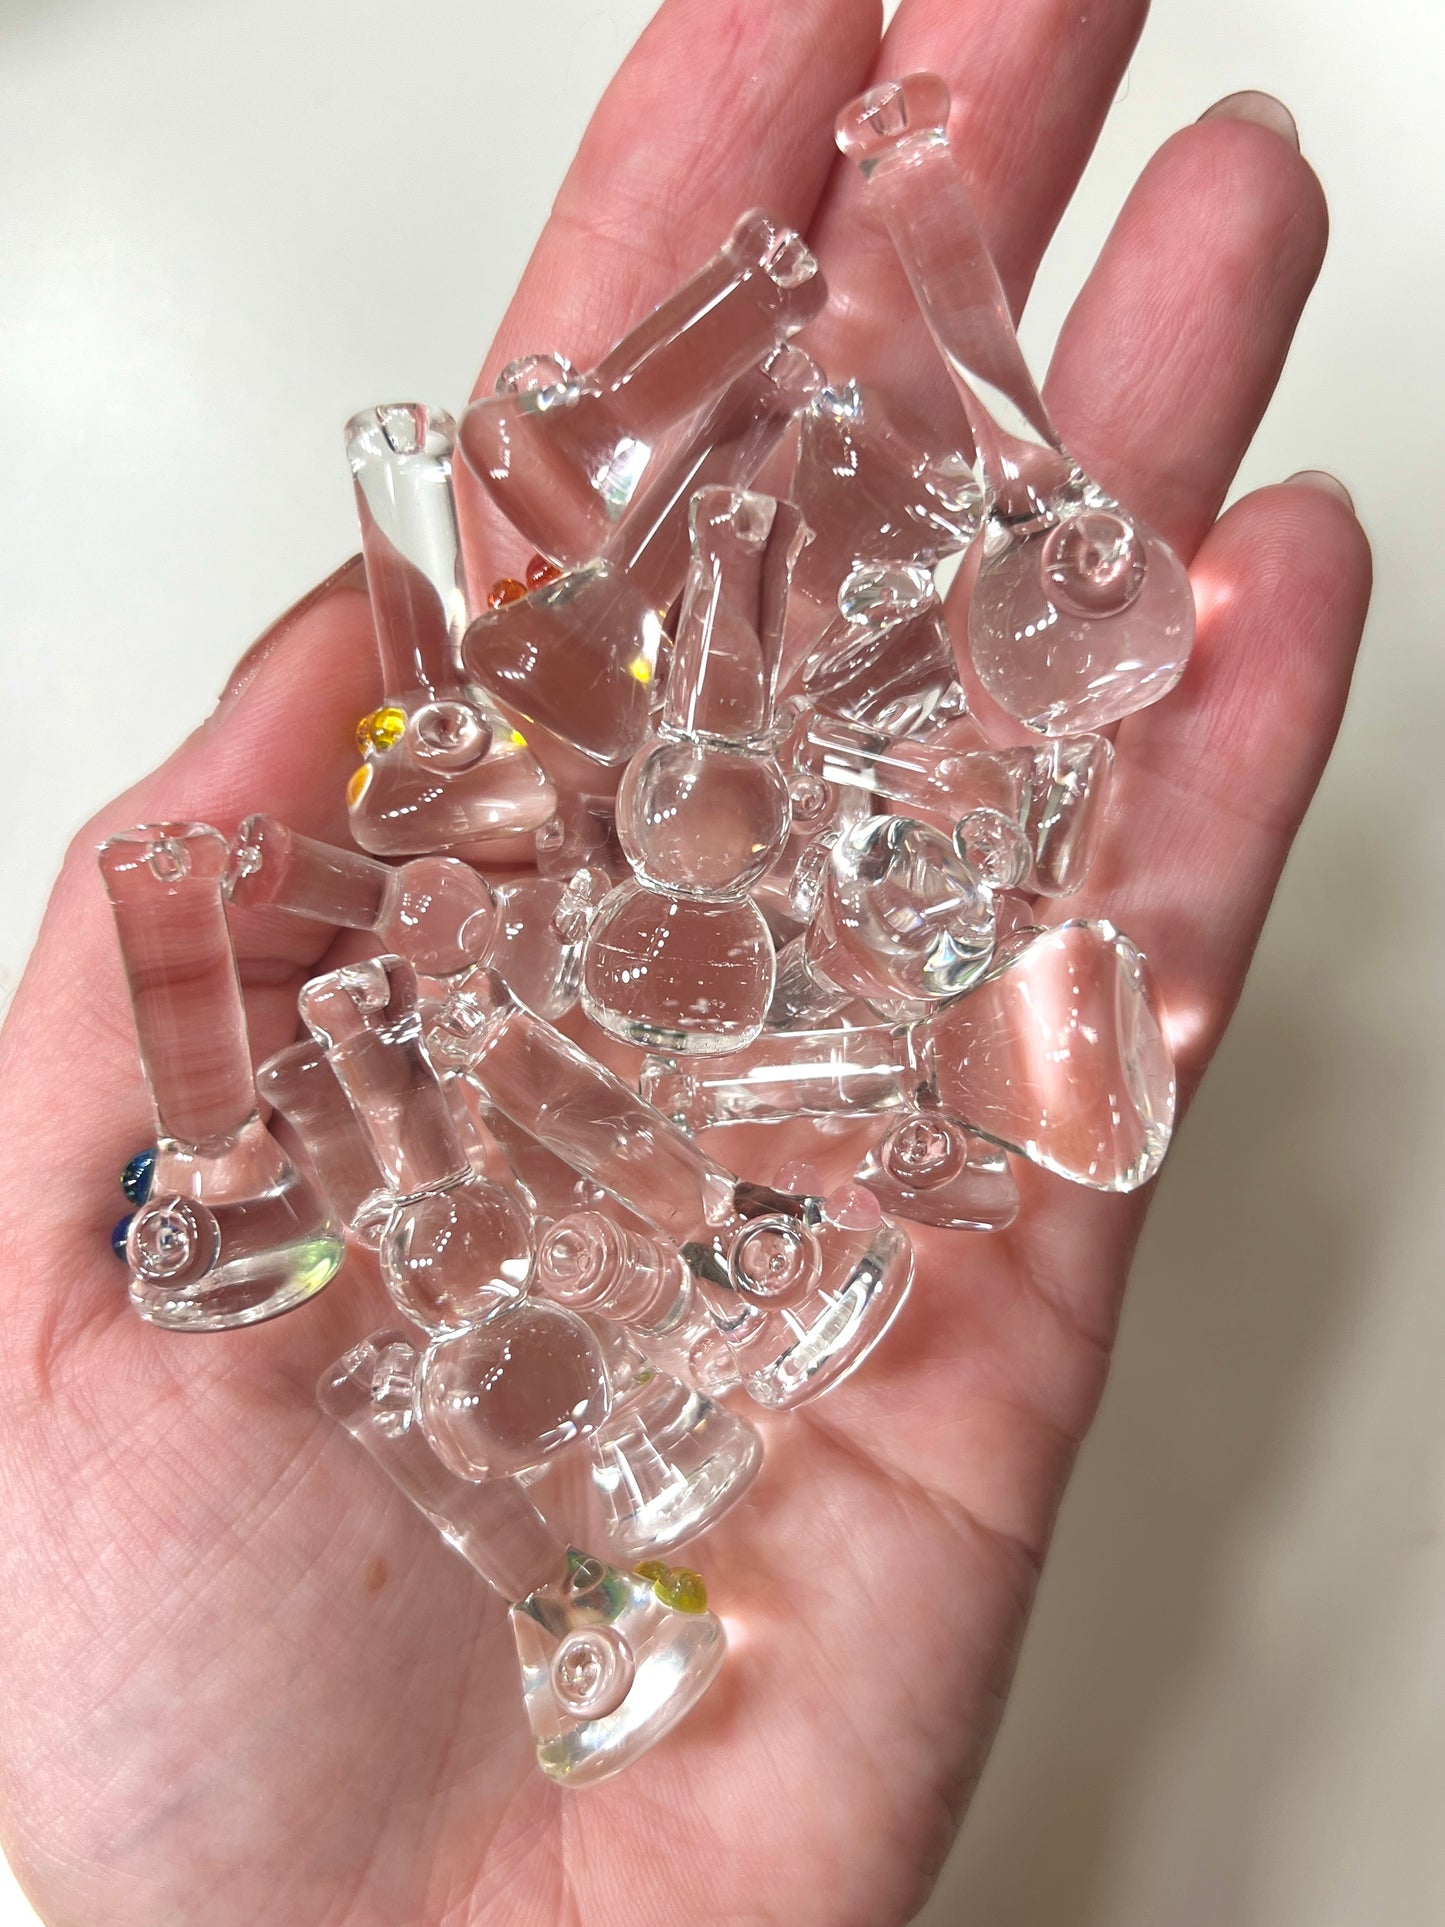 Clear Miniature Solid Glass Sculptures